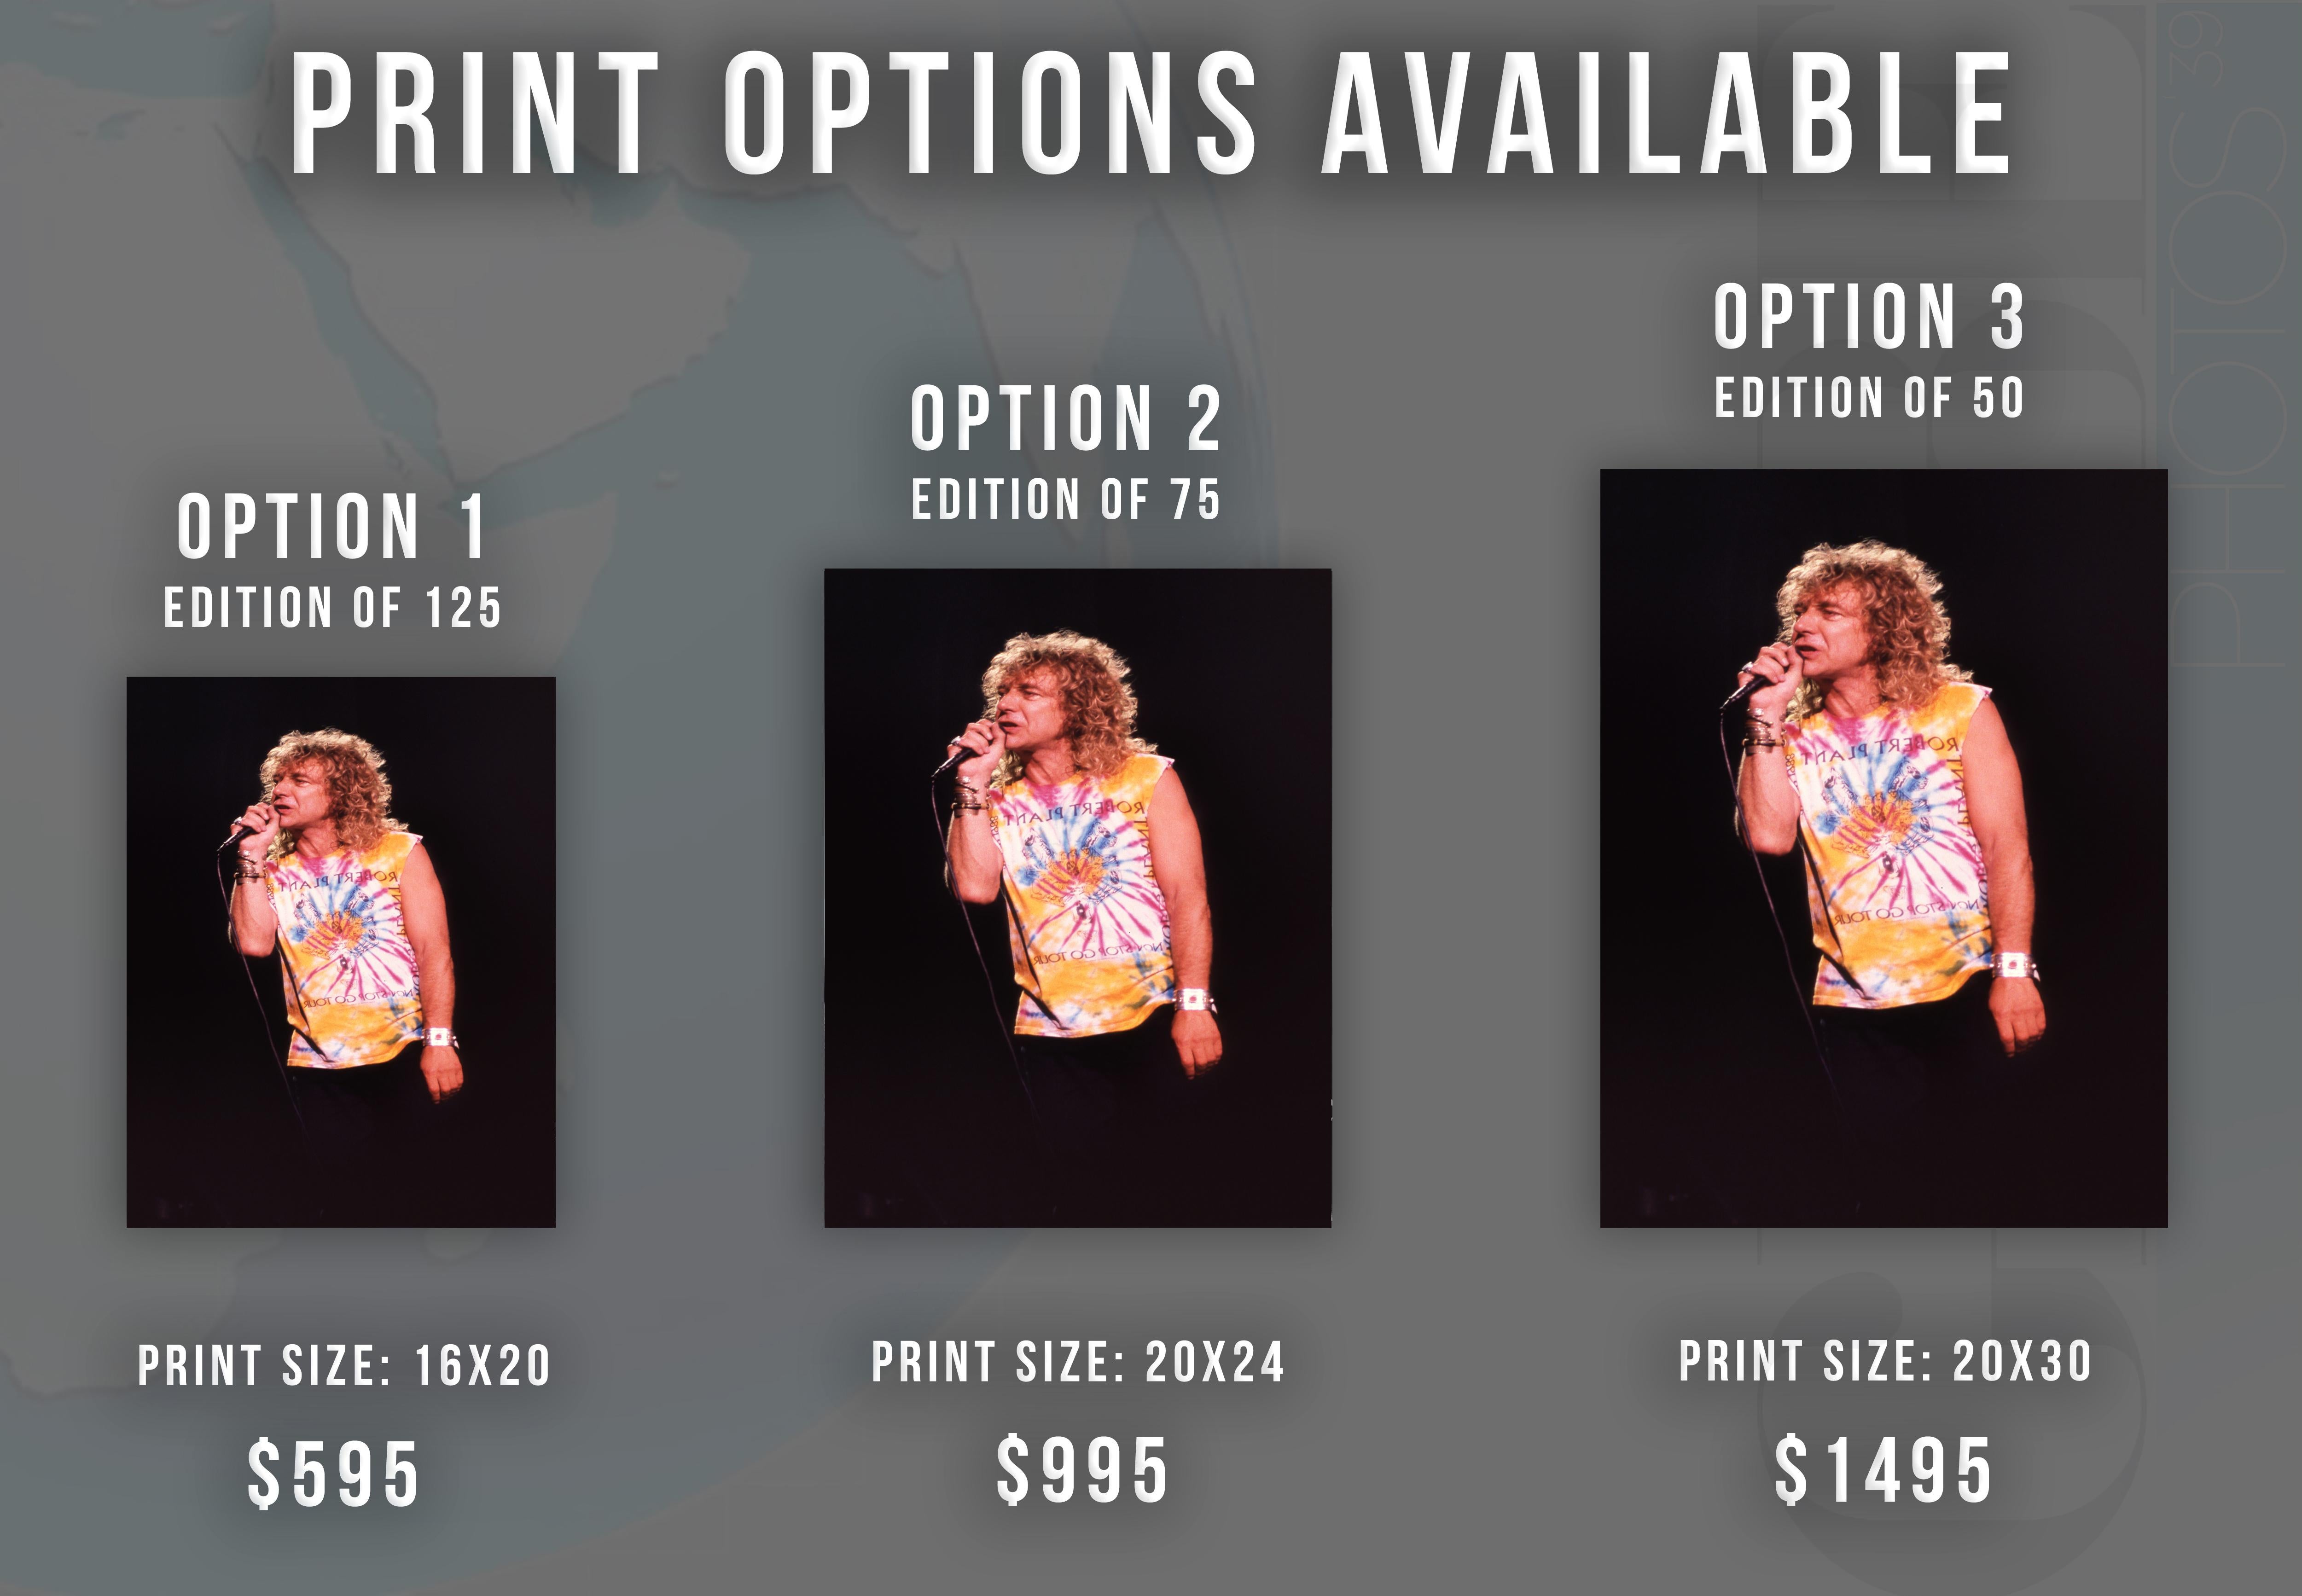 Robert Plant Performing in Tie DyeFine Art Print - Photograph by Tony Defilippis